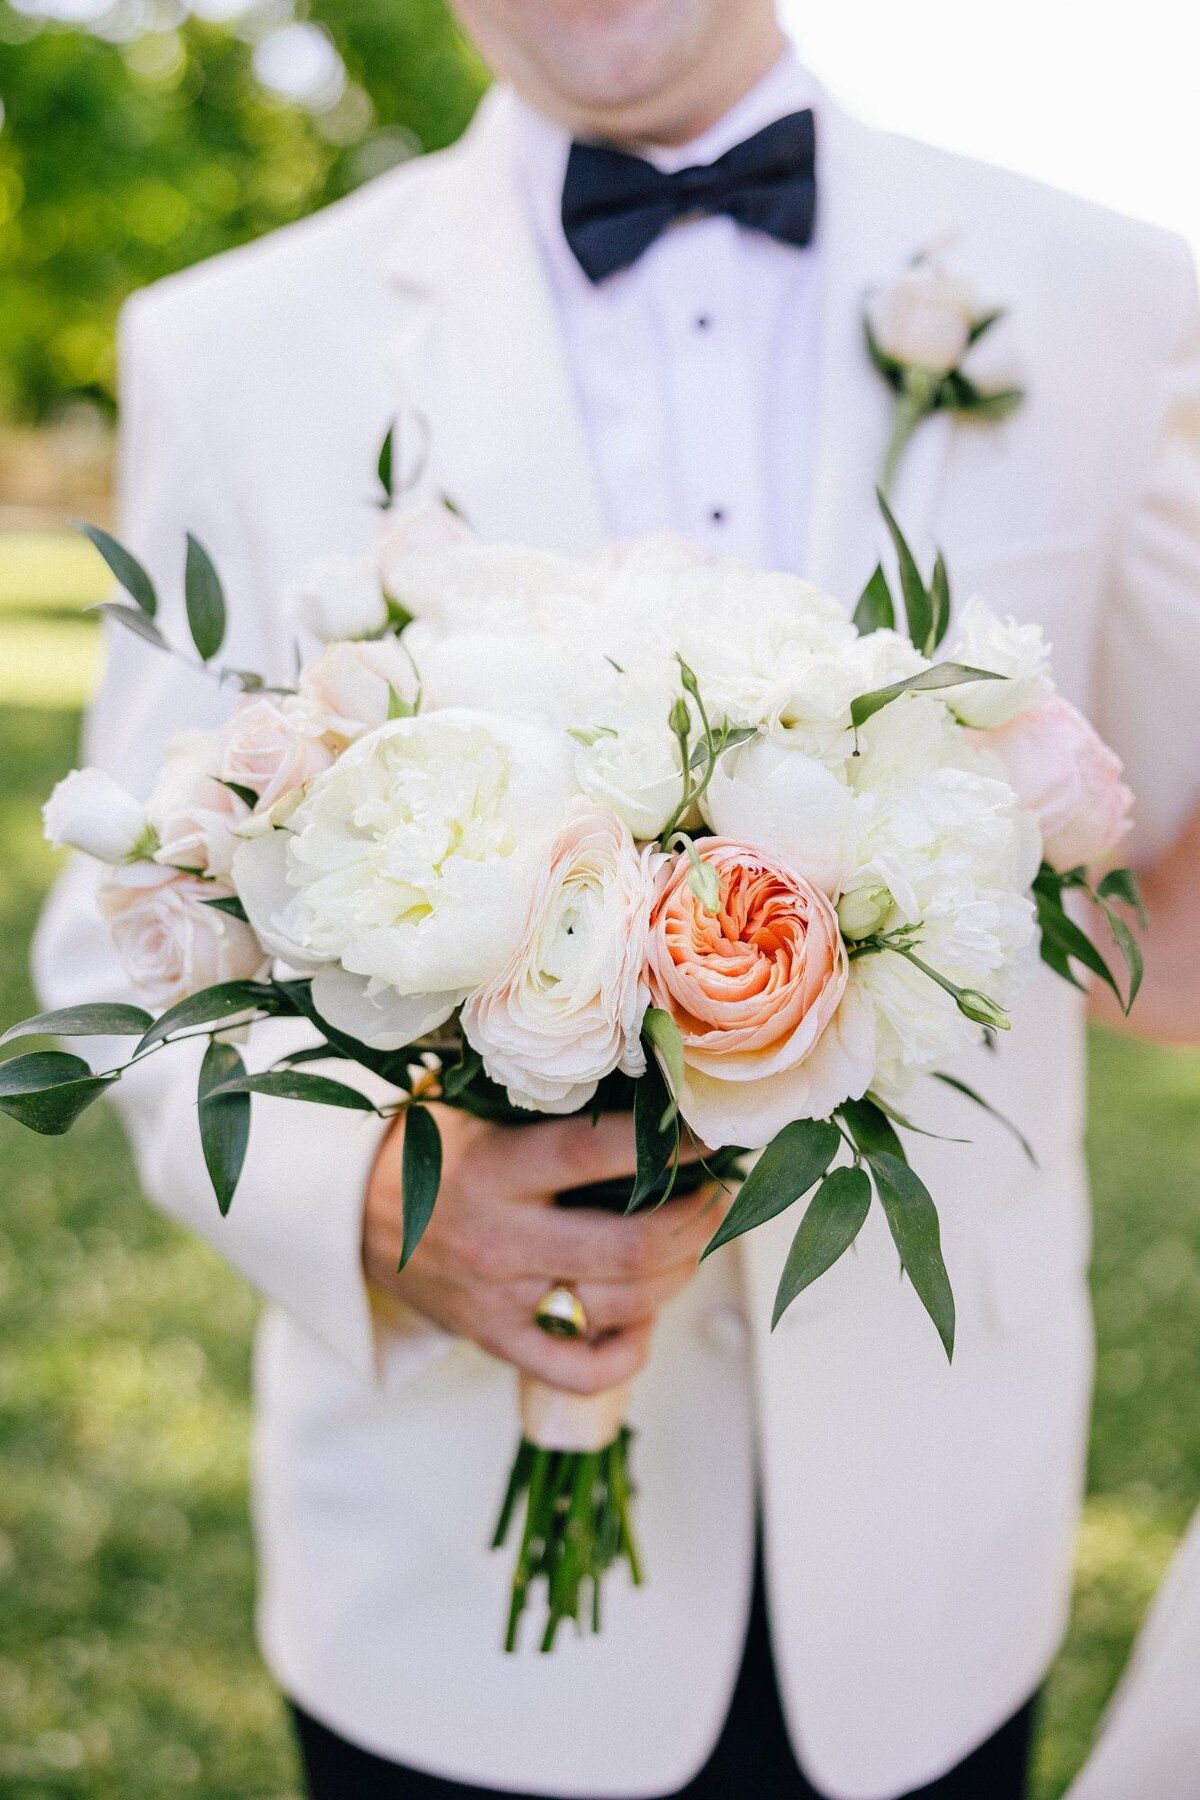 Groom in a white suit holding a bridal bouquet.